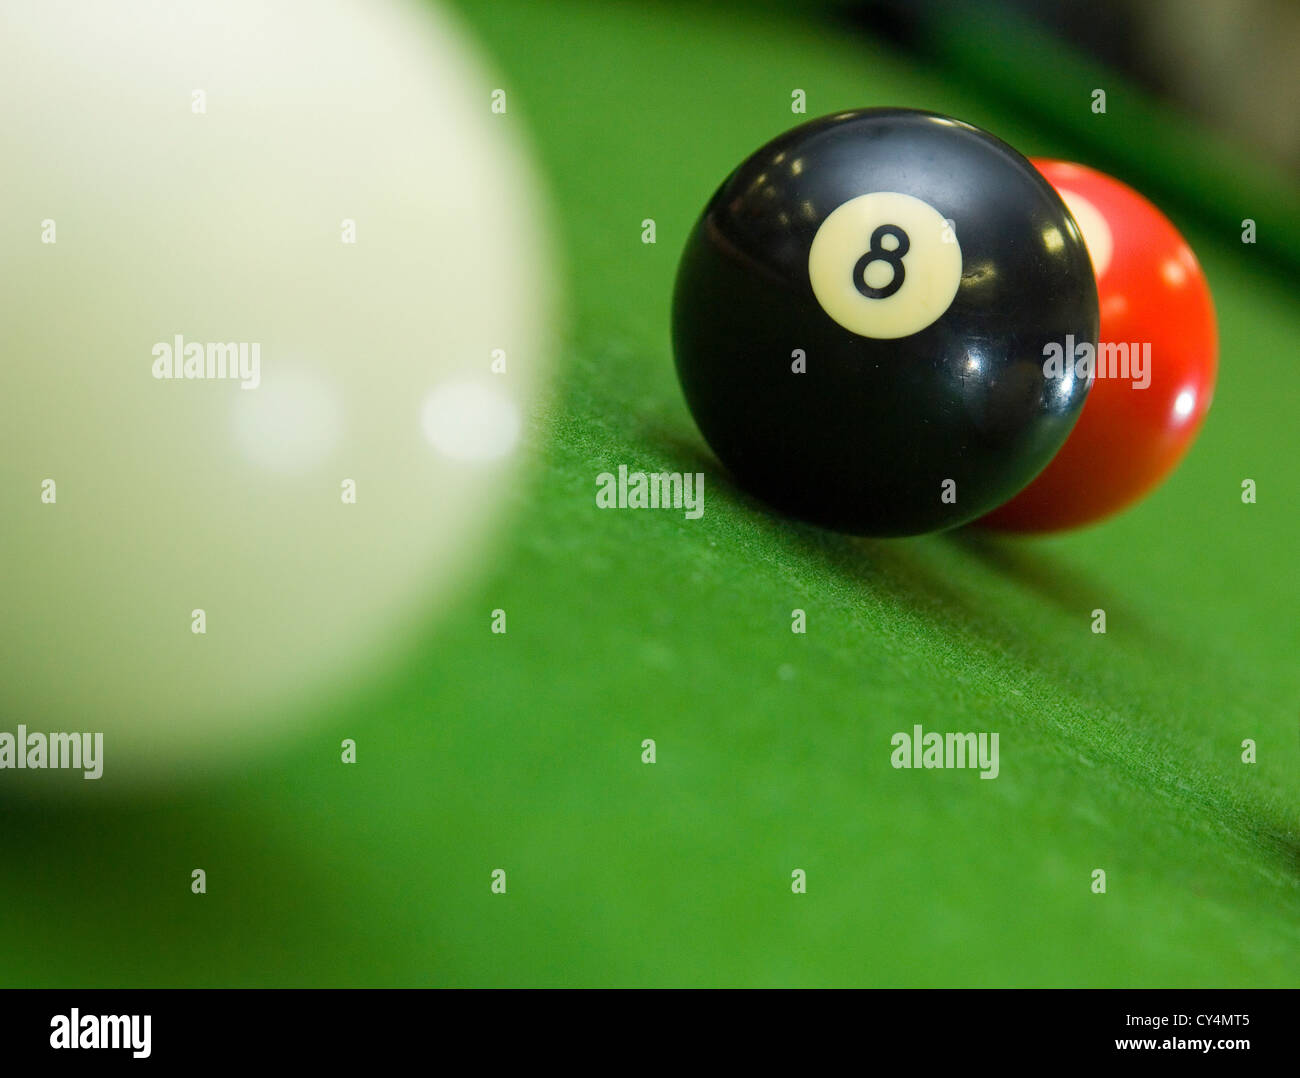 8-ball blocking shot on ball in game of pool Stock Photo